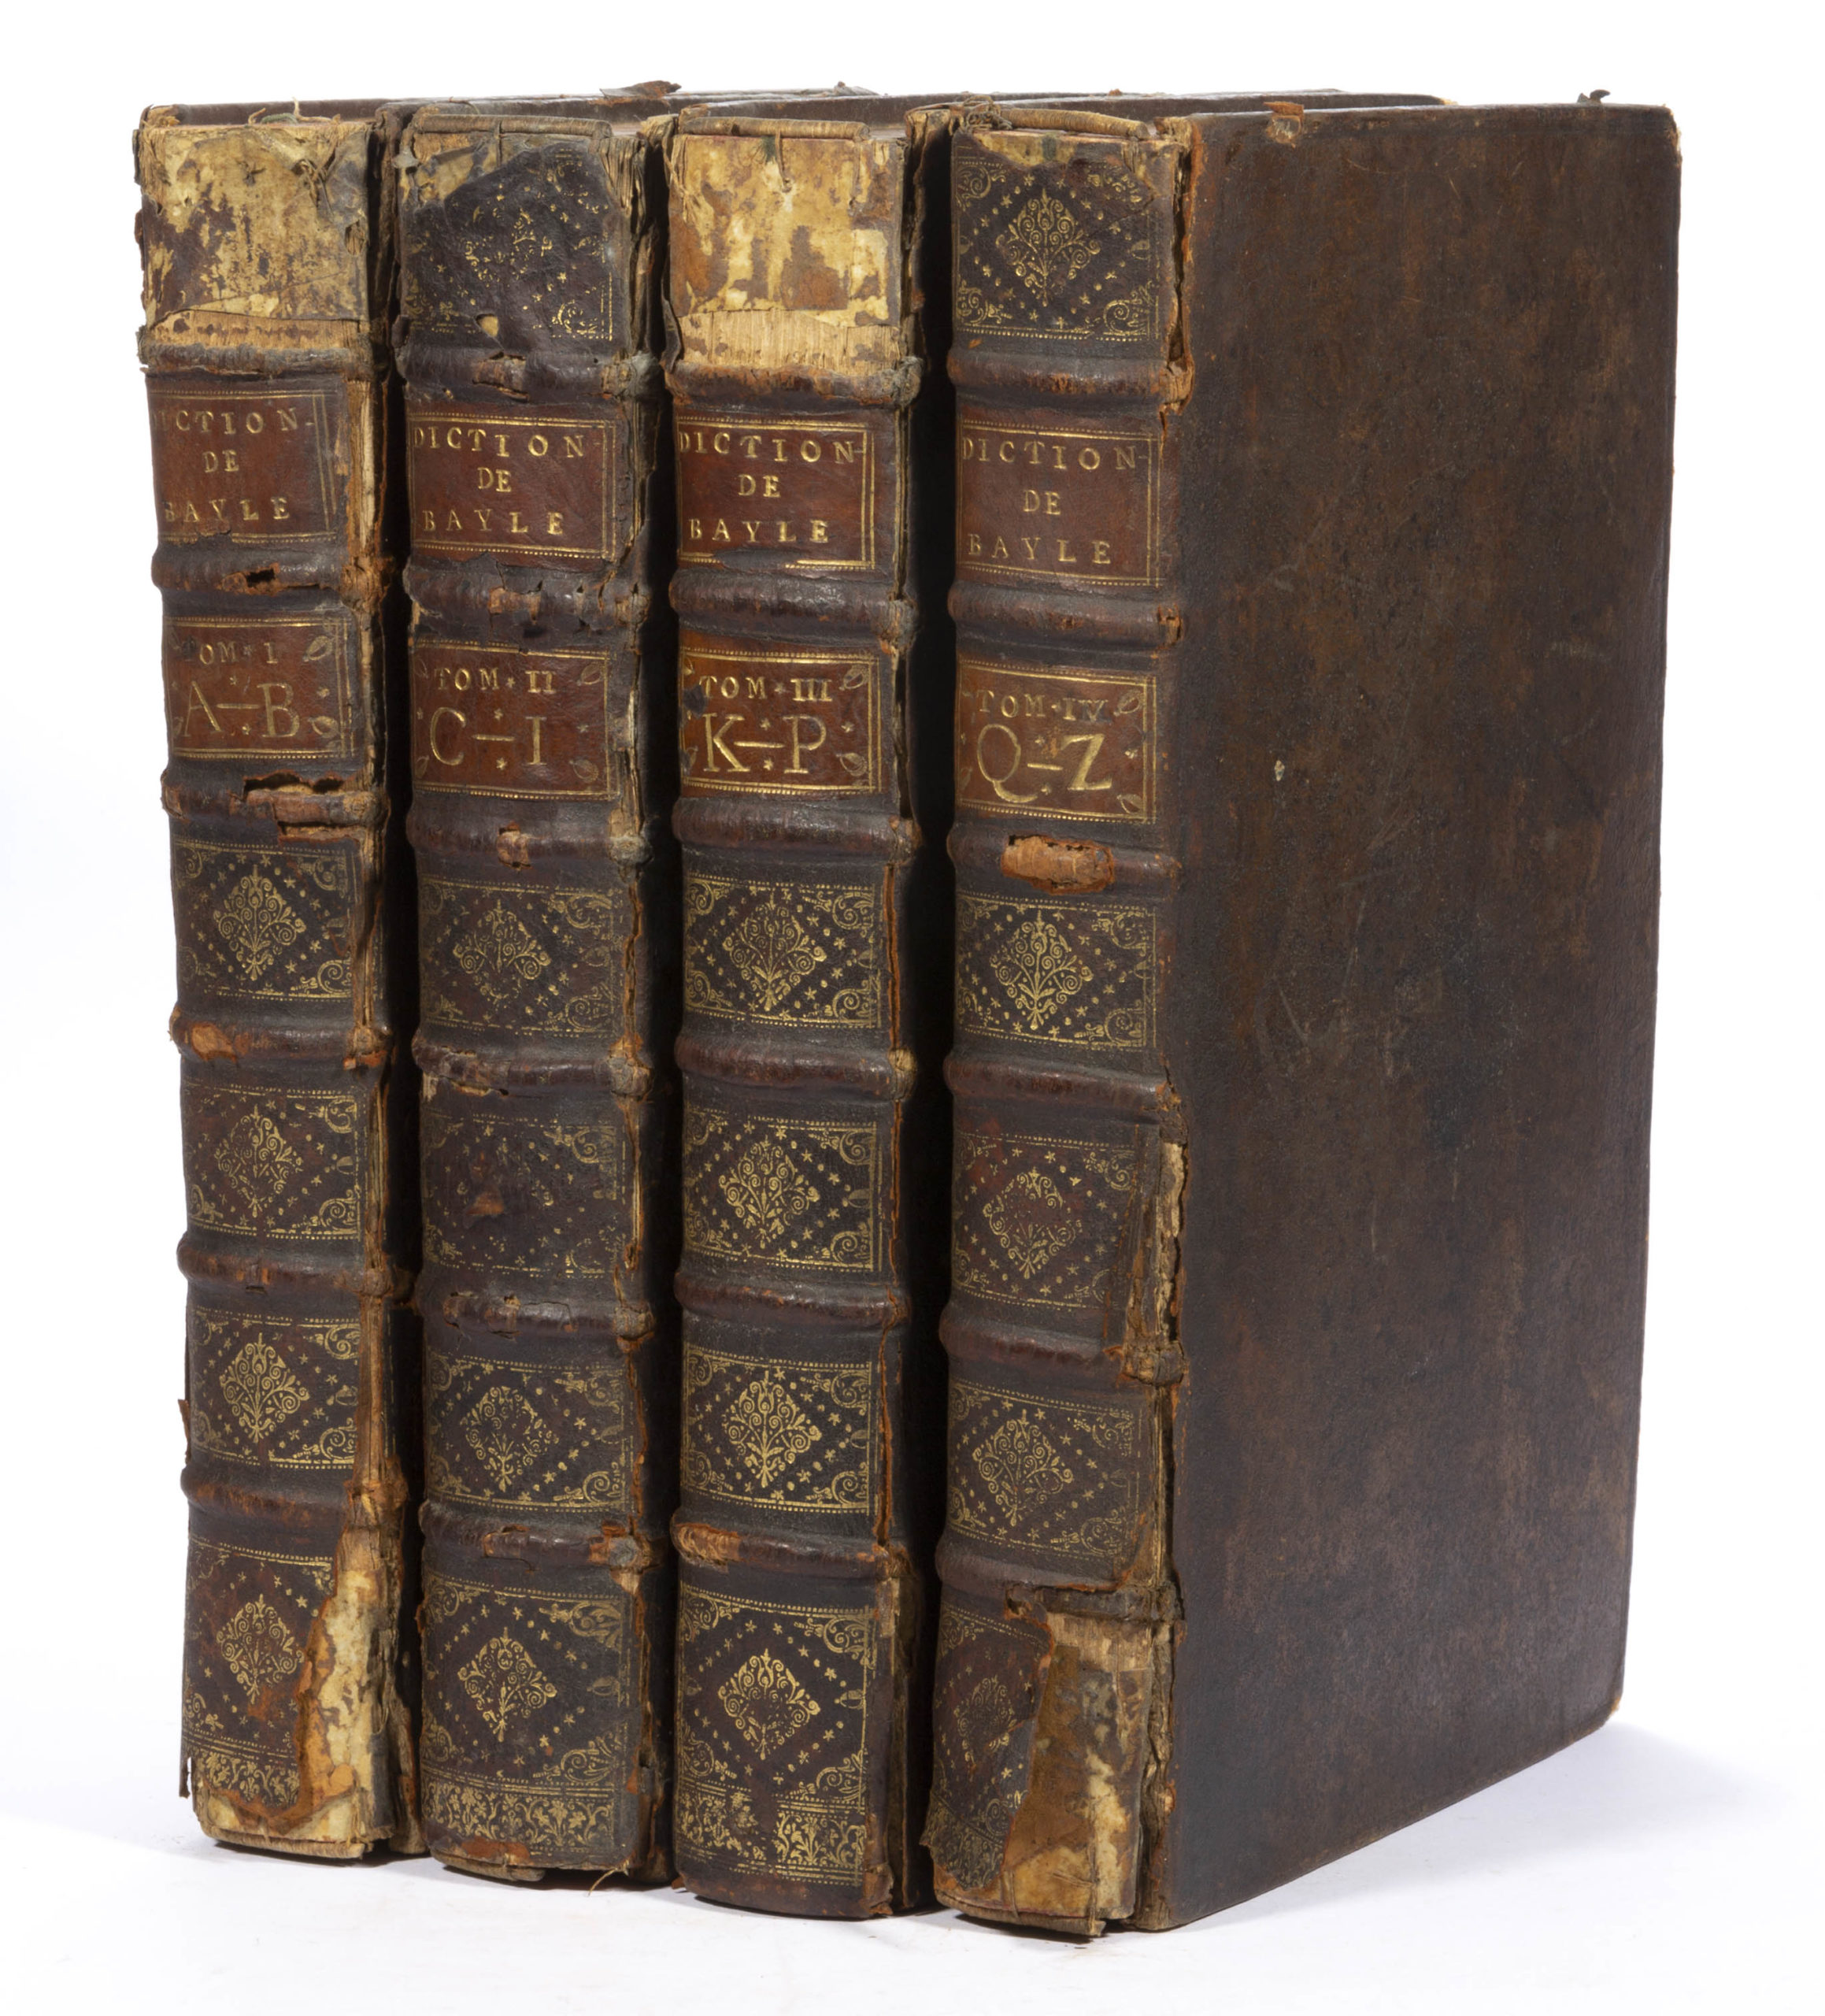 ANTIQUARIAN FRENCH BIOGRAPHICAL DICTIONARY, FOUR-VOLUME SET,